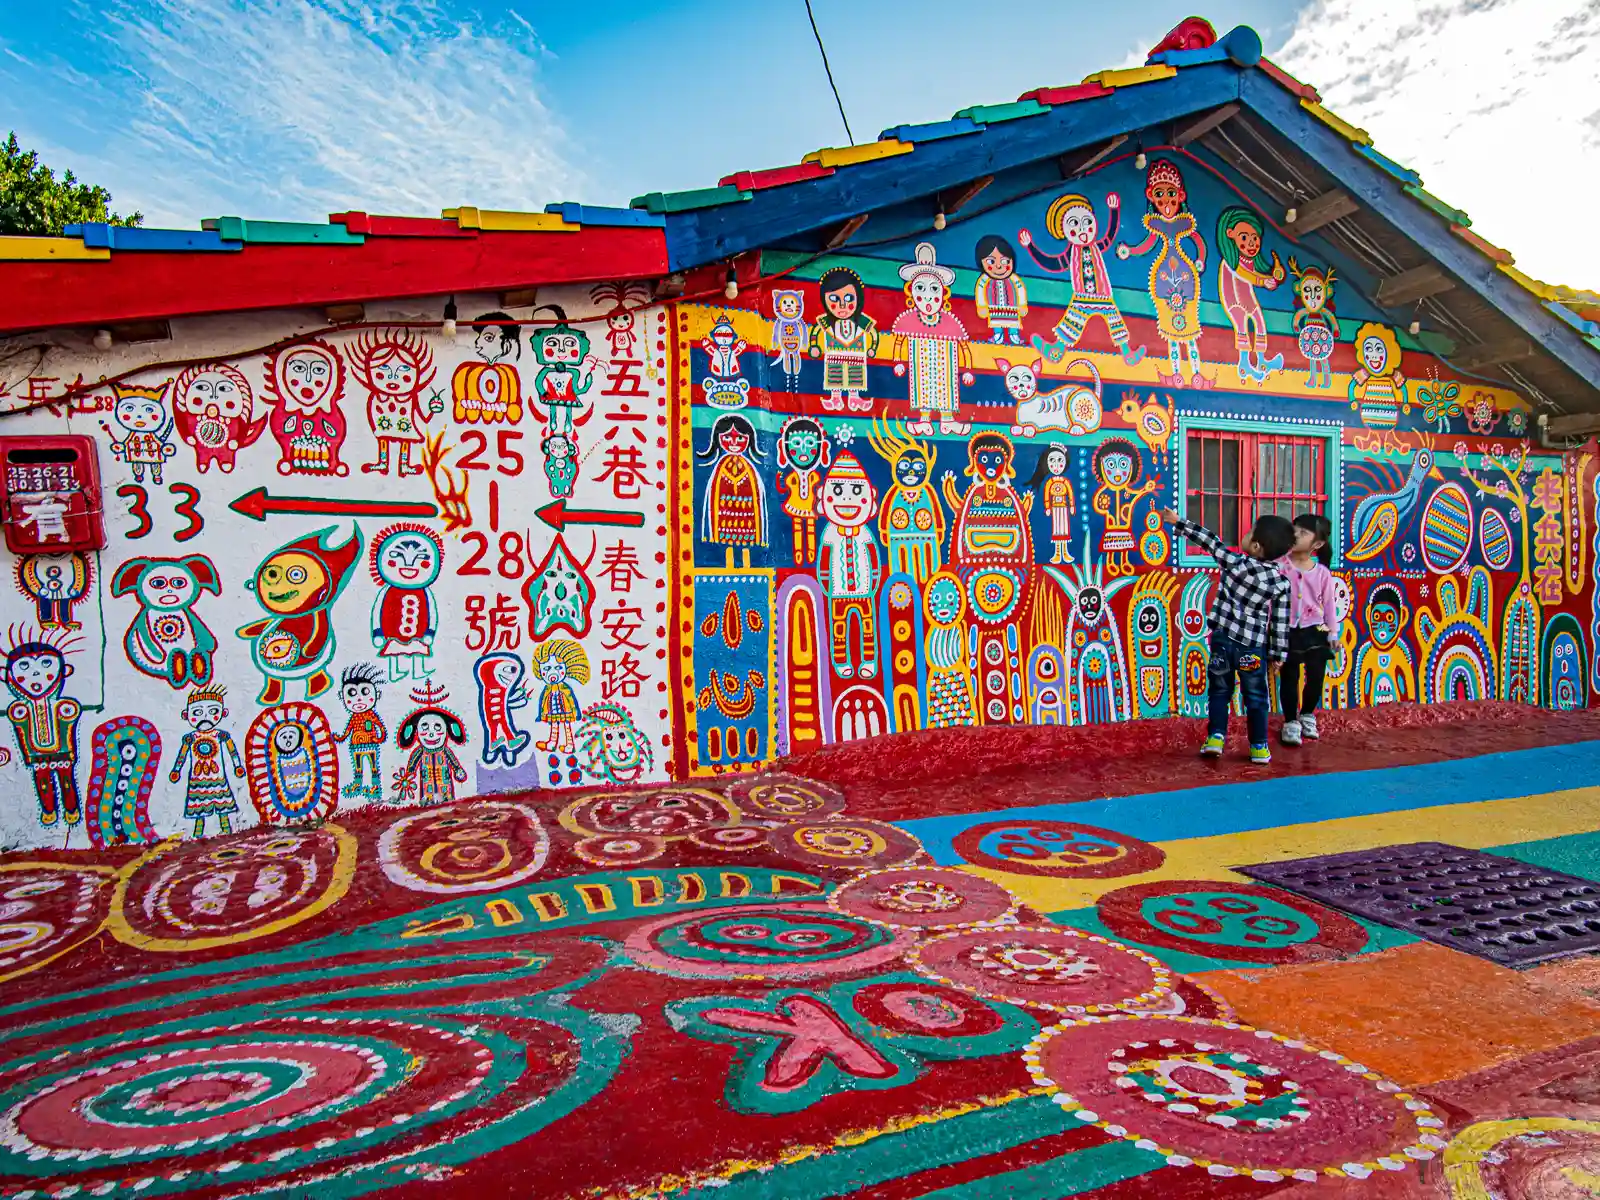 In Taichung’s Rainbow Village, a mural covers everything visible from the roof tiles of a building, to its walls and mailbox, to the cement road surface before it.